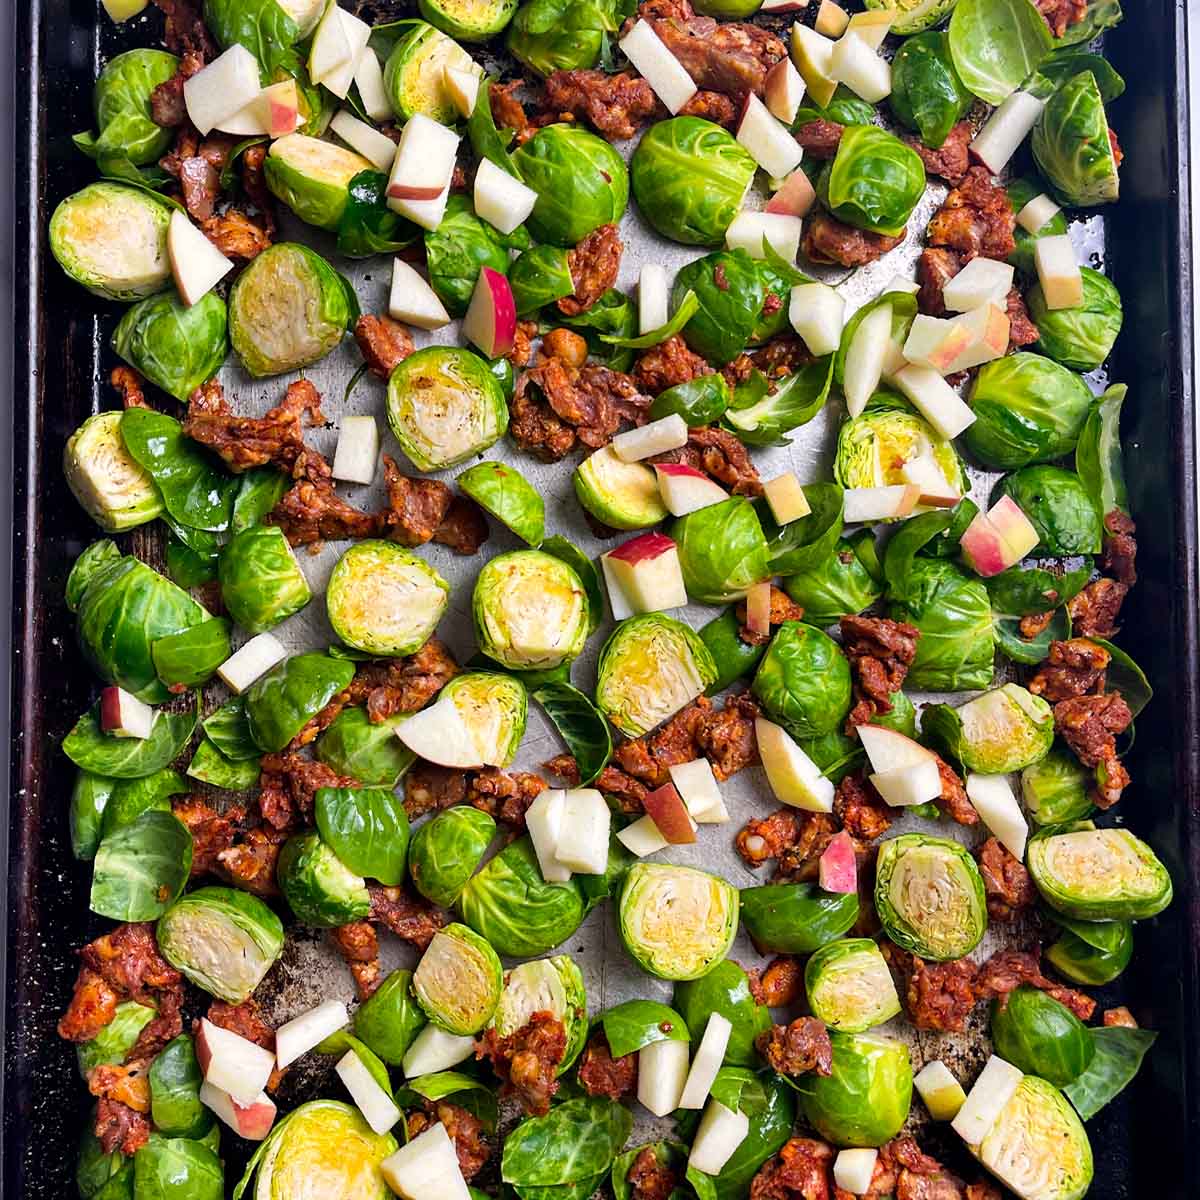 Brussels sprouts with sausage, apples and seasonings on a sheet tray getting ready to roast.